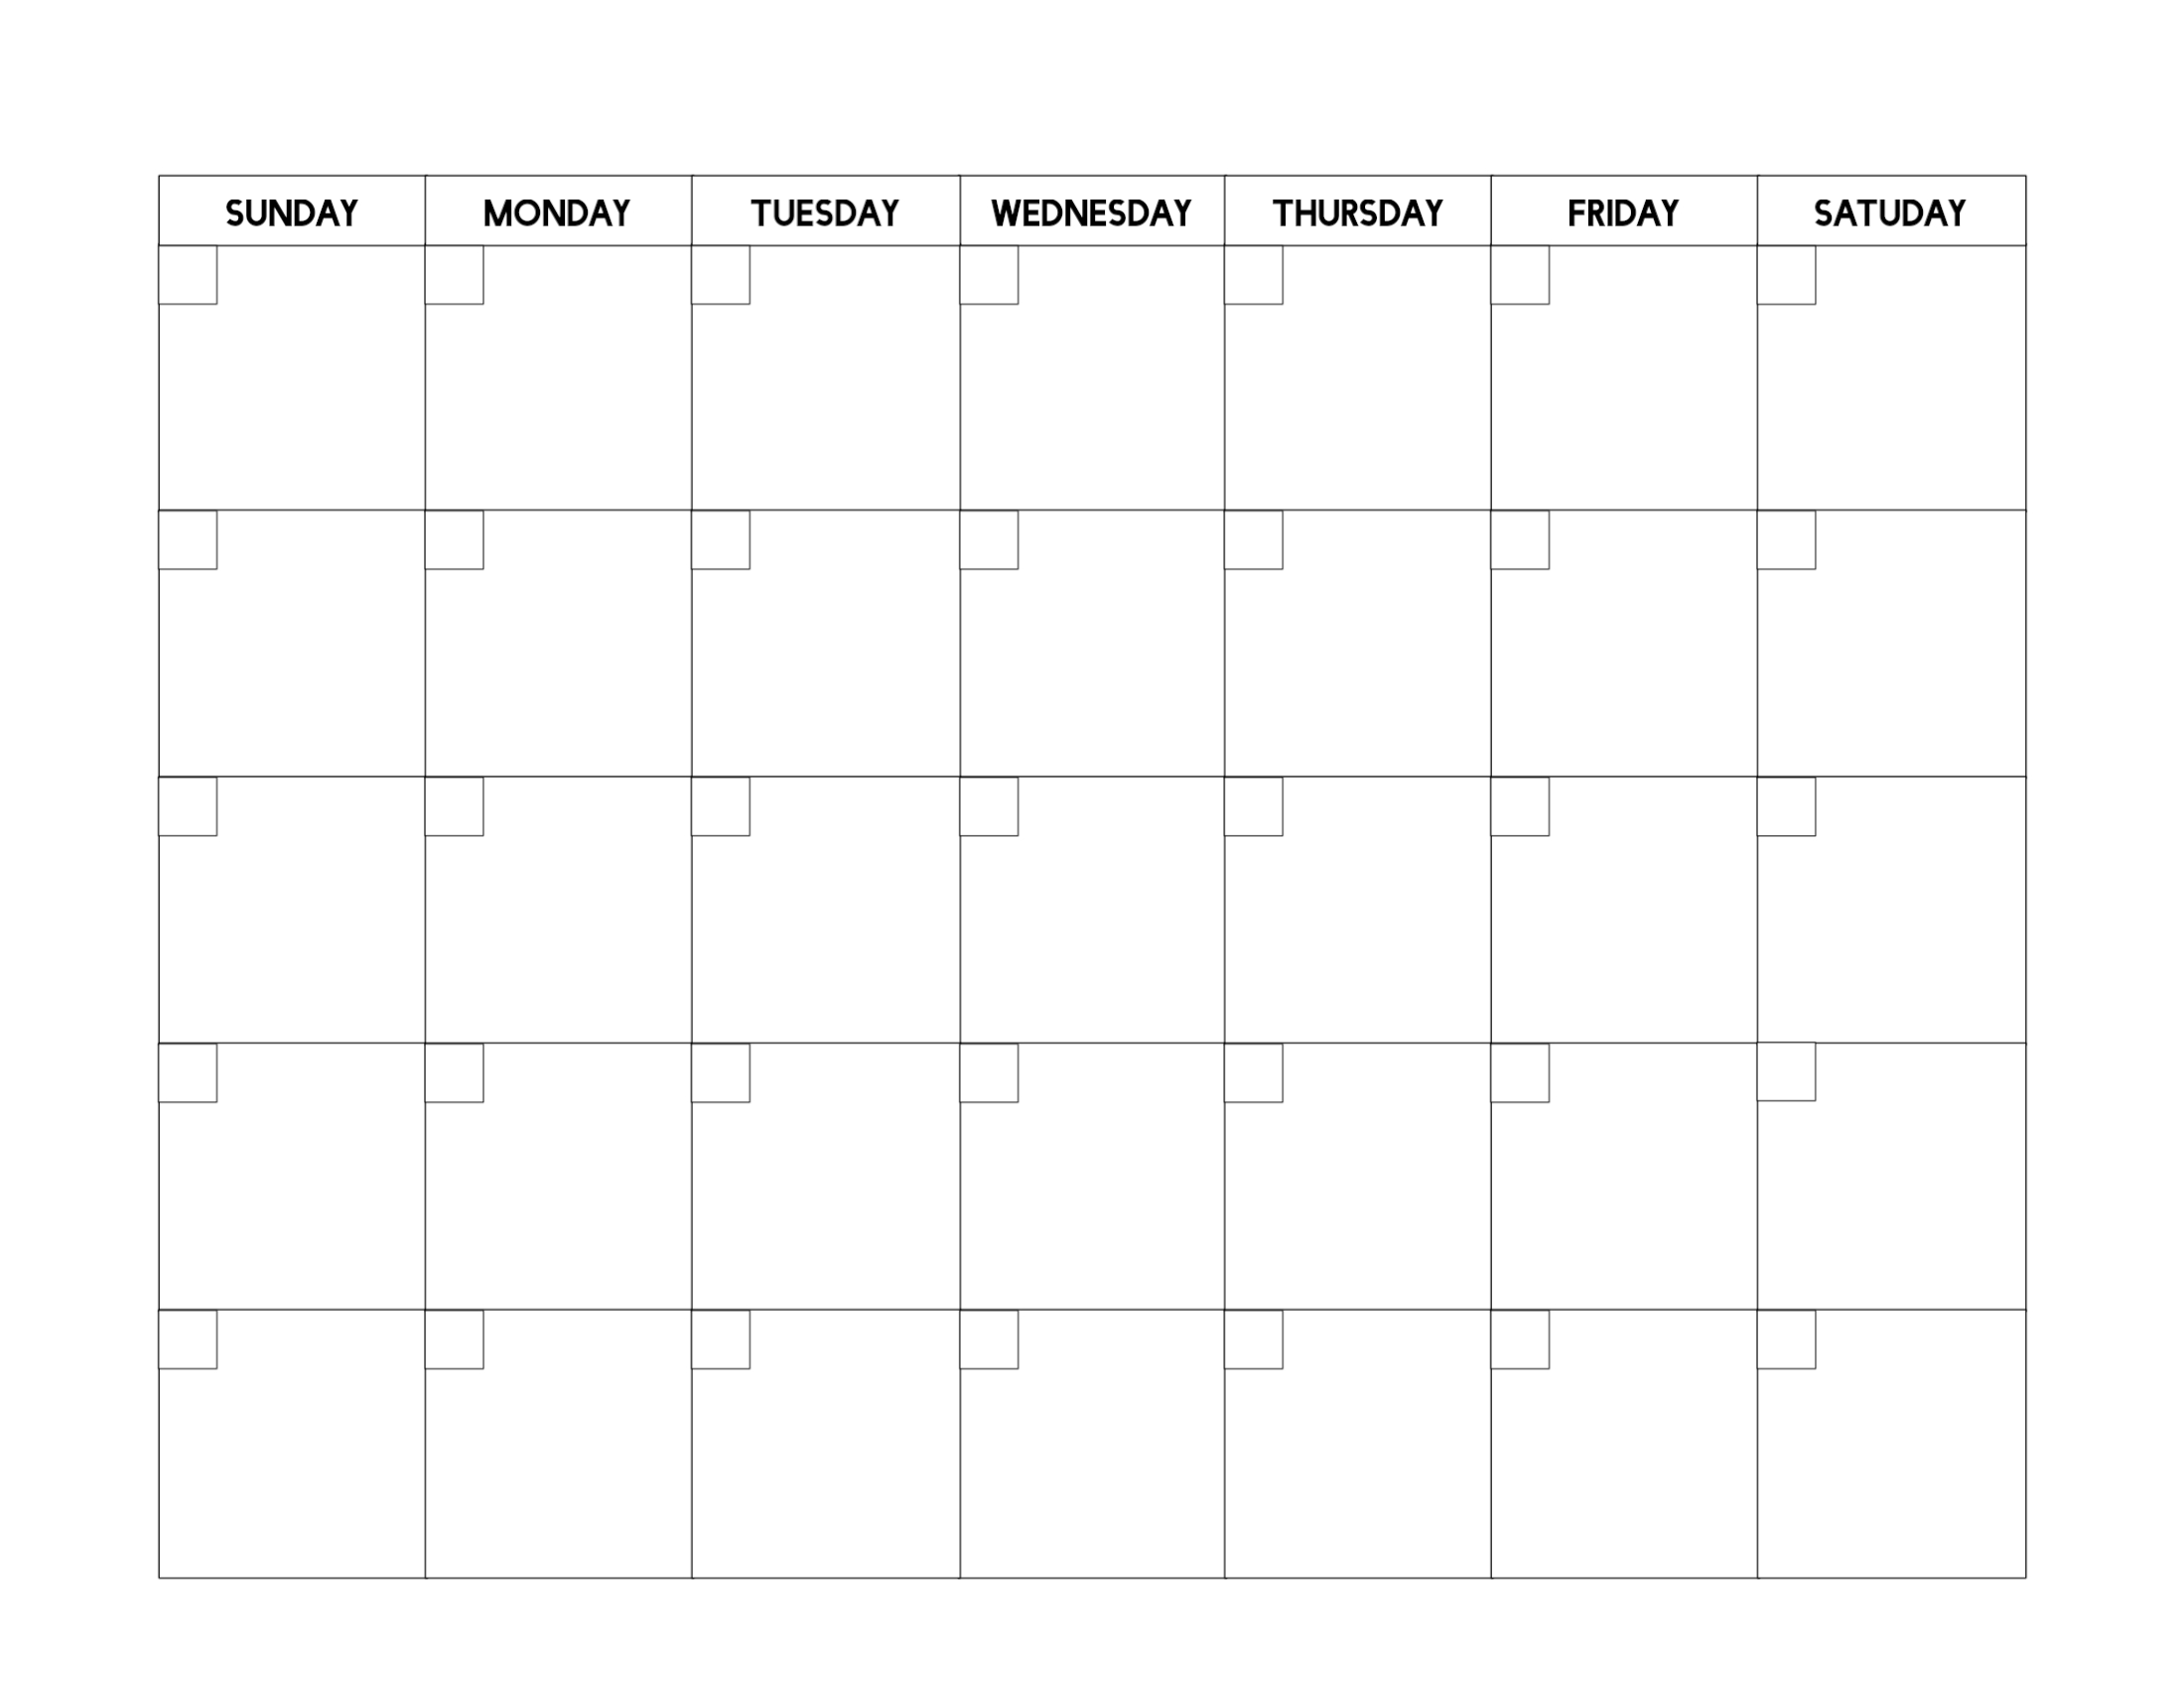 Free Printable Blank Calendar Template - Paper Trail Design Blank Calendar With No Dates